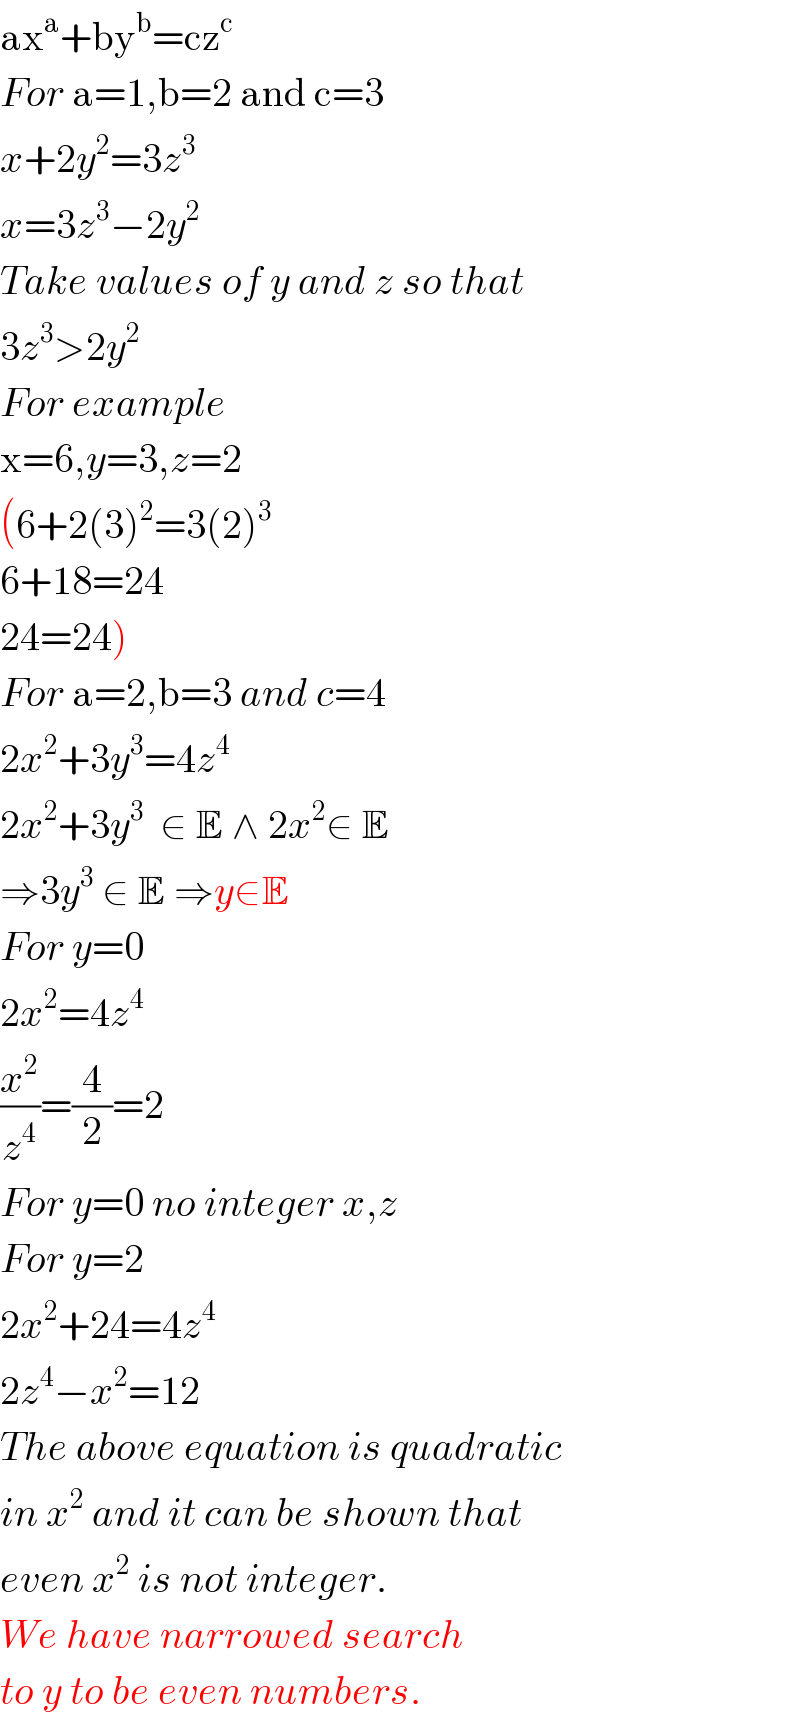 ax^a +by^b =cz^c   For a=1,b=2 and c=3  x+2y^2 =3z^3   x=3z^3 −2y^2   Take values of y and z so that  3z^3 >2y^2   For example  x=6,y=3,z=2  (6+2(3)^2 =3(2)^3   6+18=24  24=24)  For a=2,b=3 and c=4  2x^2 +3y^3 =4z^4   2x^2 +3y^3   ∈ E ∧ 2x^2 ∈ E  ⇒3y^3  ∈ E ⇒y∈E  For y=0  2x^2 =4z^4   (x^2 /z^4 )=(4/2)=2  For y=0 no integer x,z  For y=2  2x^2 +24=4z^4   2z^4 −x^2 =12  The above equation is quadratic   in x^2  and it can be shown that  even x^2  is not integer.  We have narrowed search  to y to be even numbers.  